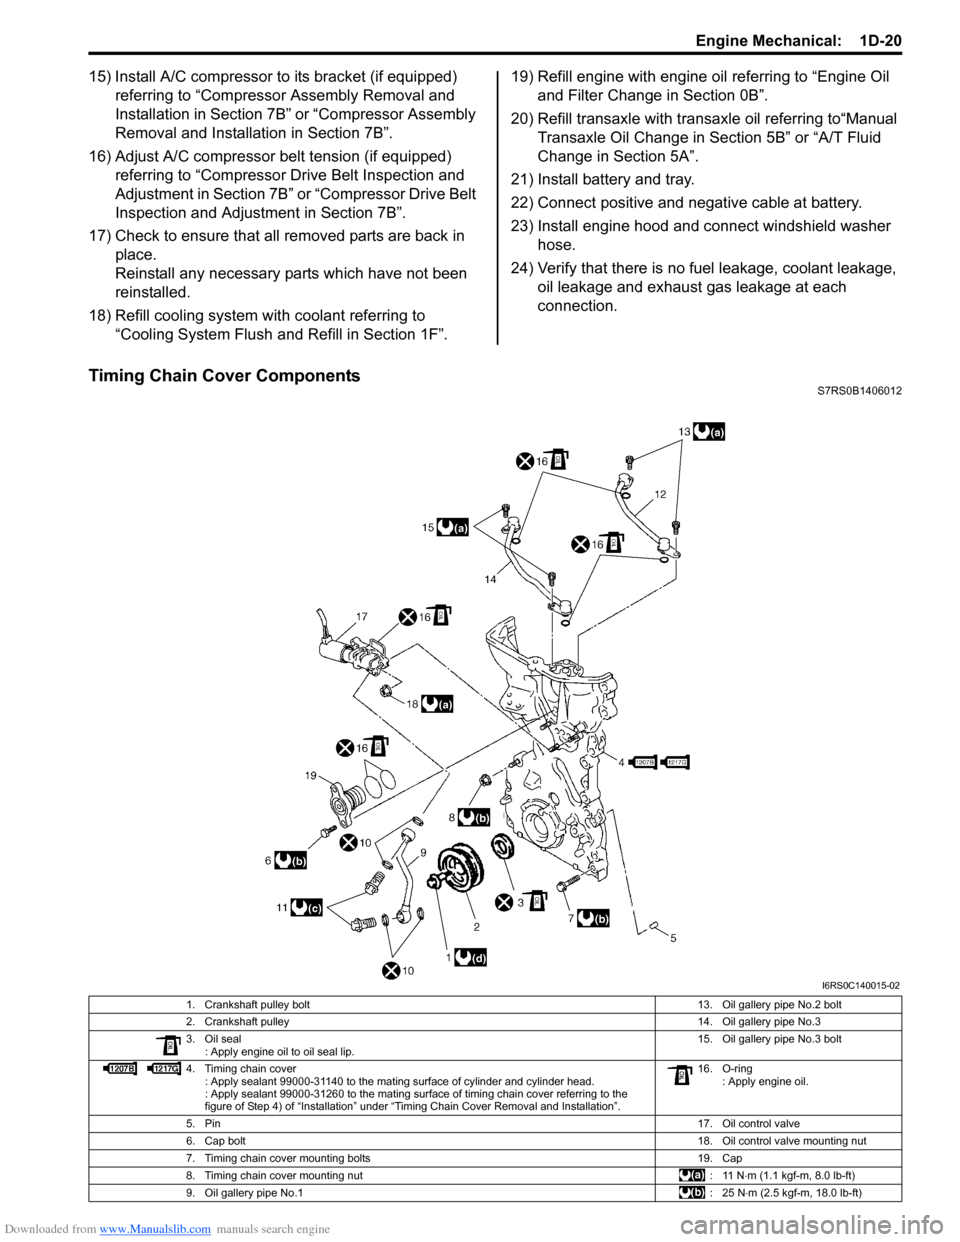 SUZUKI SWIFT 2008 2.G Service Workshop Manual Downloaded from www.Manualslib.com manuals search engine Engine Mechanical:  1D-20
15) Install A/C compressor to its bracket (if equipped) referring to “Compressor Assembly Removal and 
Installation